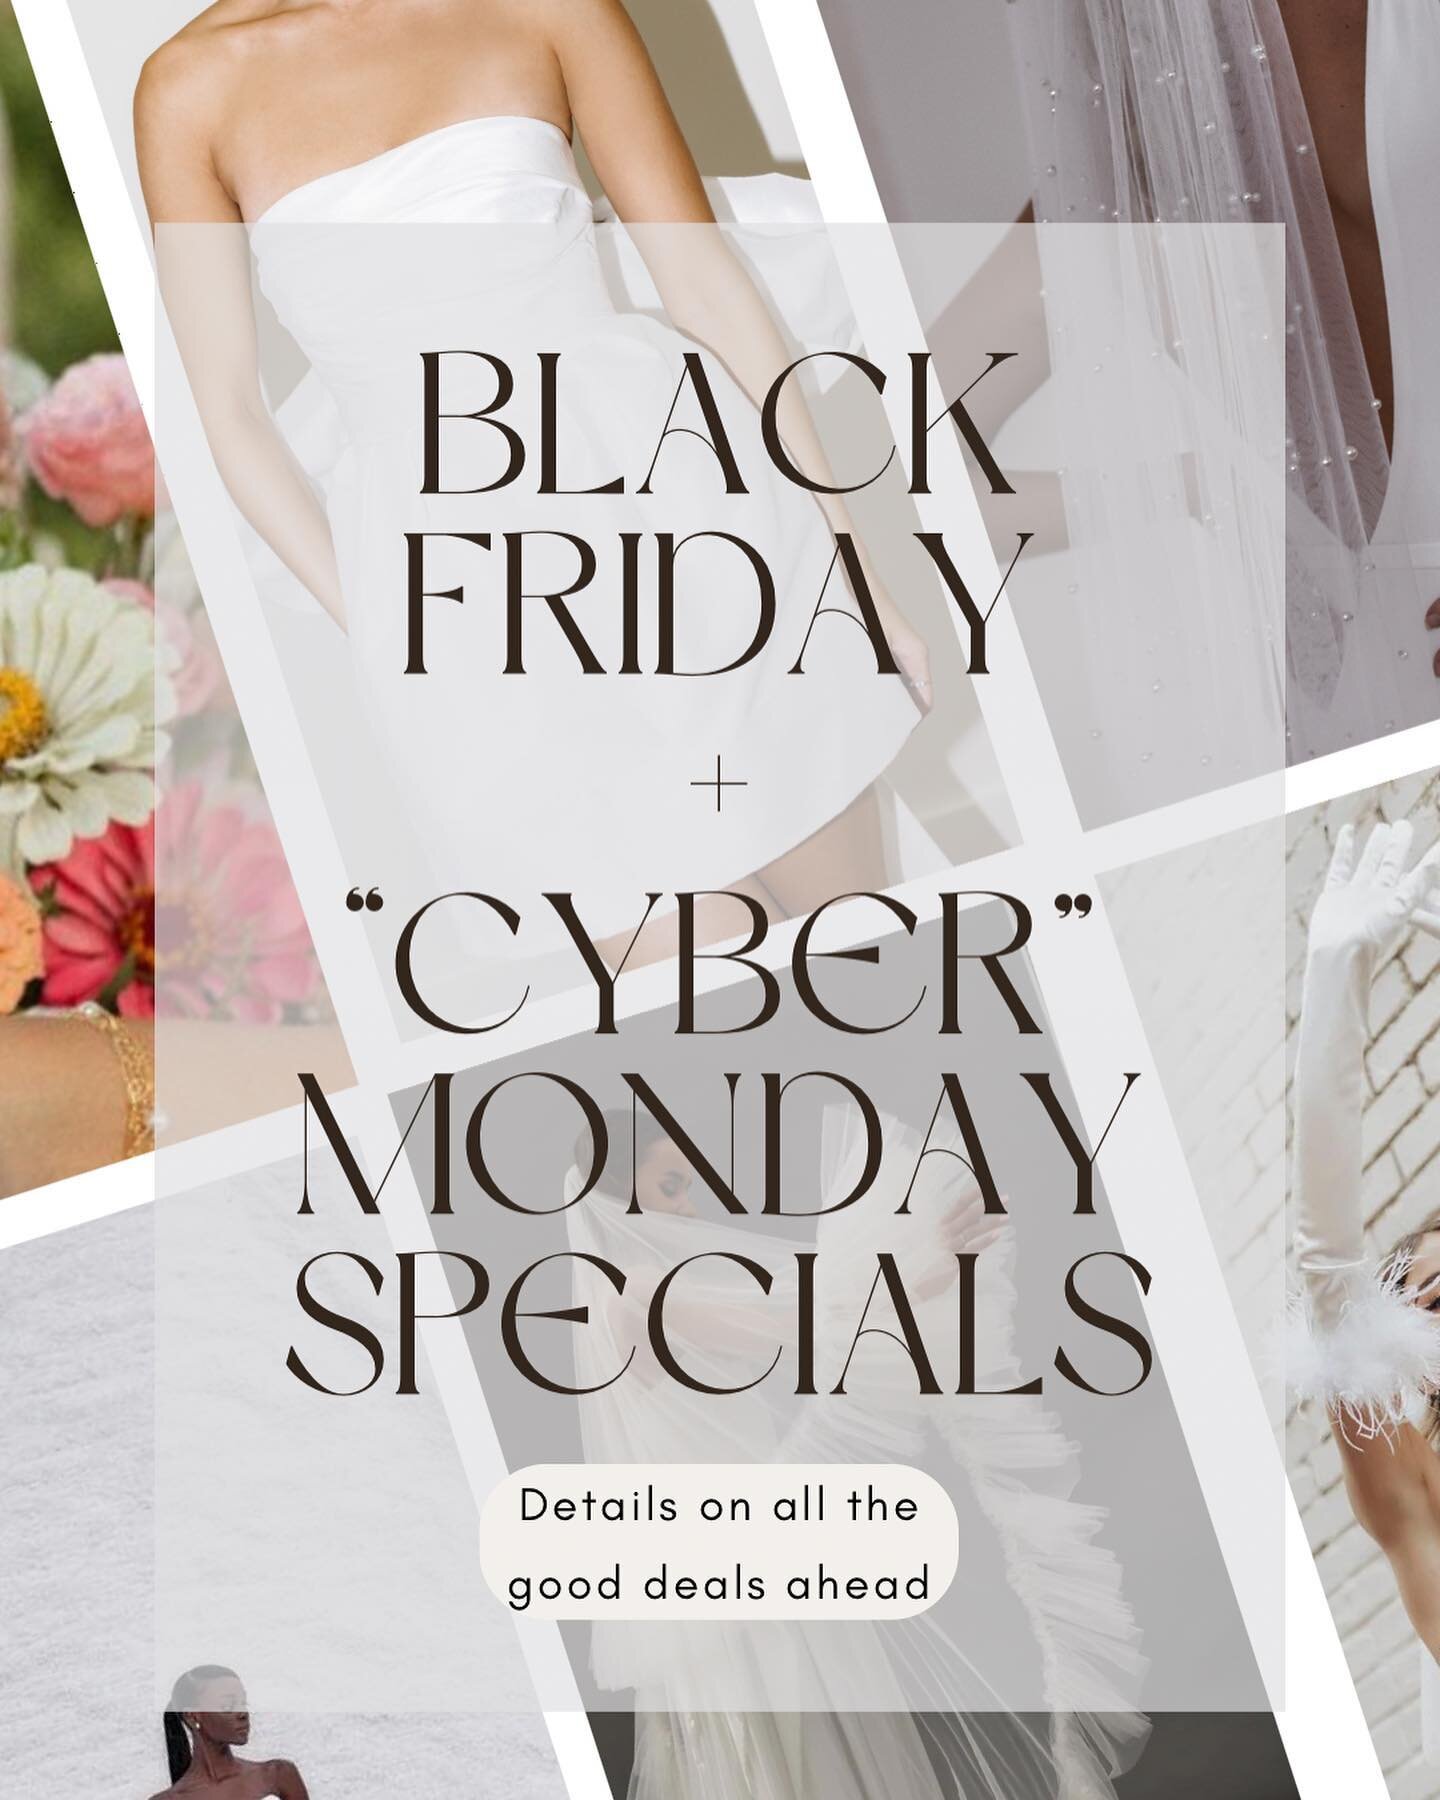 double post cause we&rsquo;ve got BLACK FRIDAY SPECIALS👏 so many good deals that start this Friday!! brides, you DON&rsquo;T want to miss this✨
&bull;
&bull;
&bull;
&bull;
#chantillybridalstudio #weddingearrings #weddingfashion #bridalearrings #brid